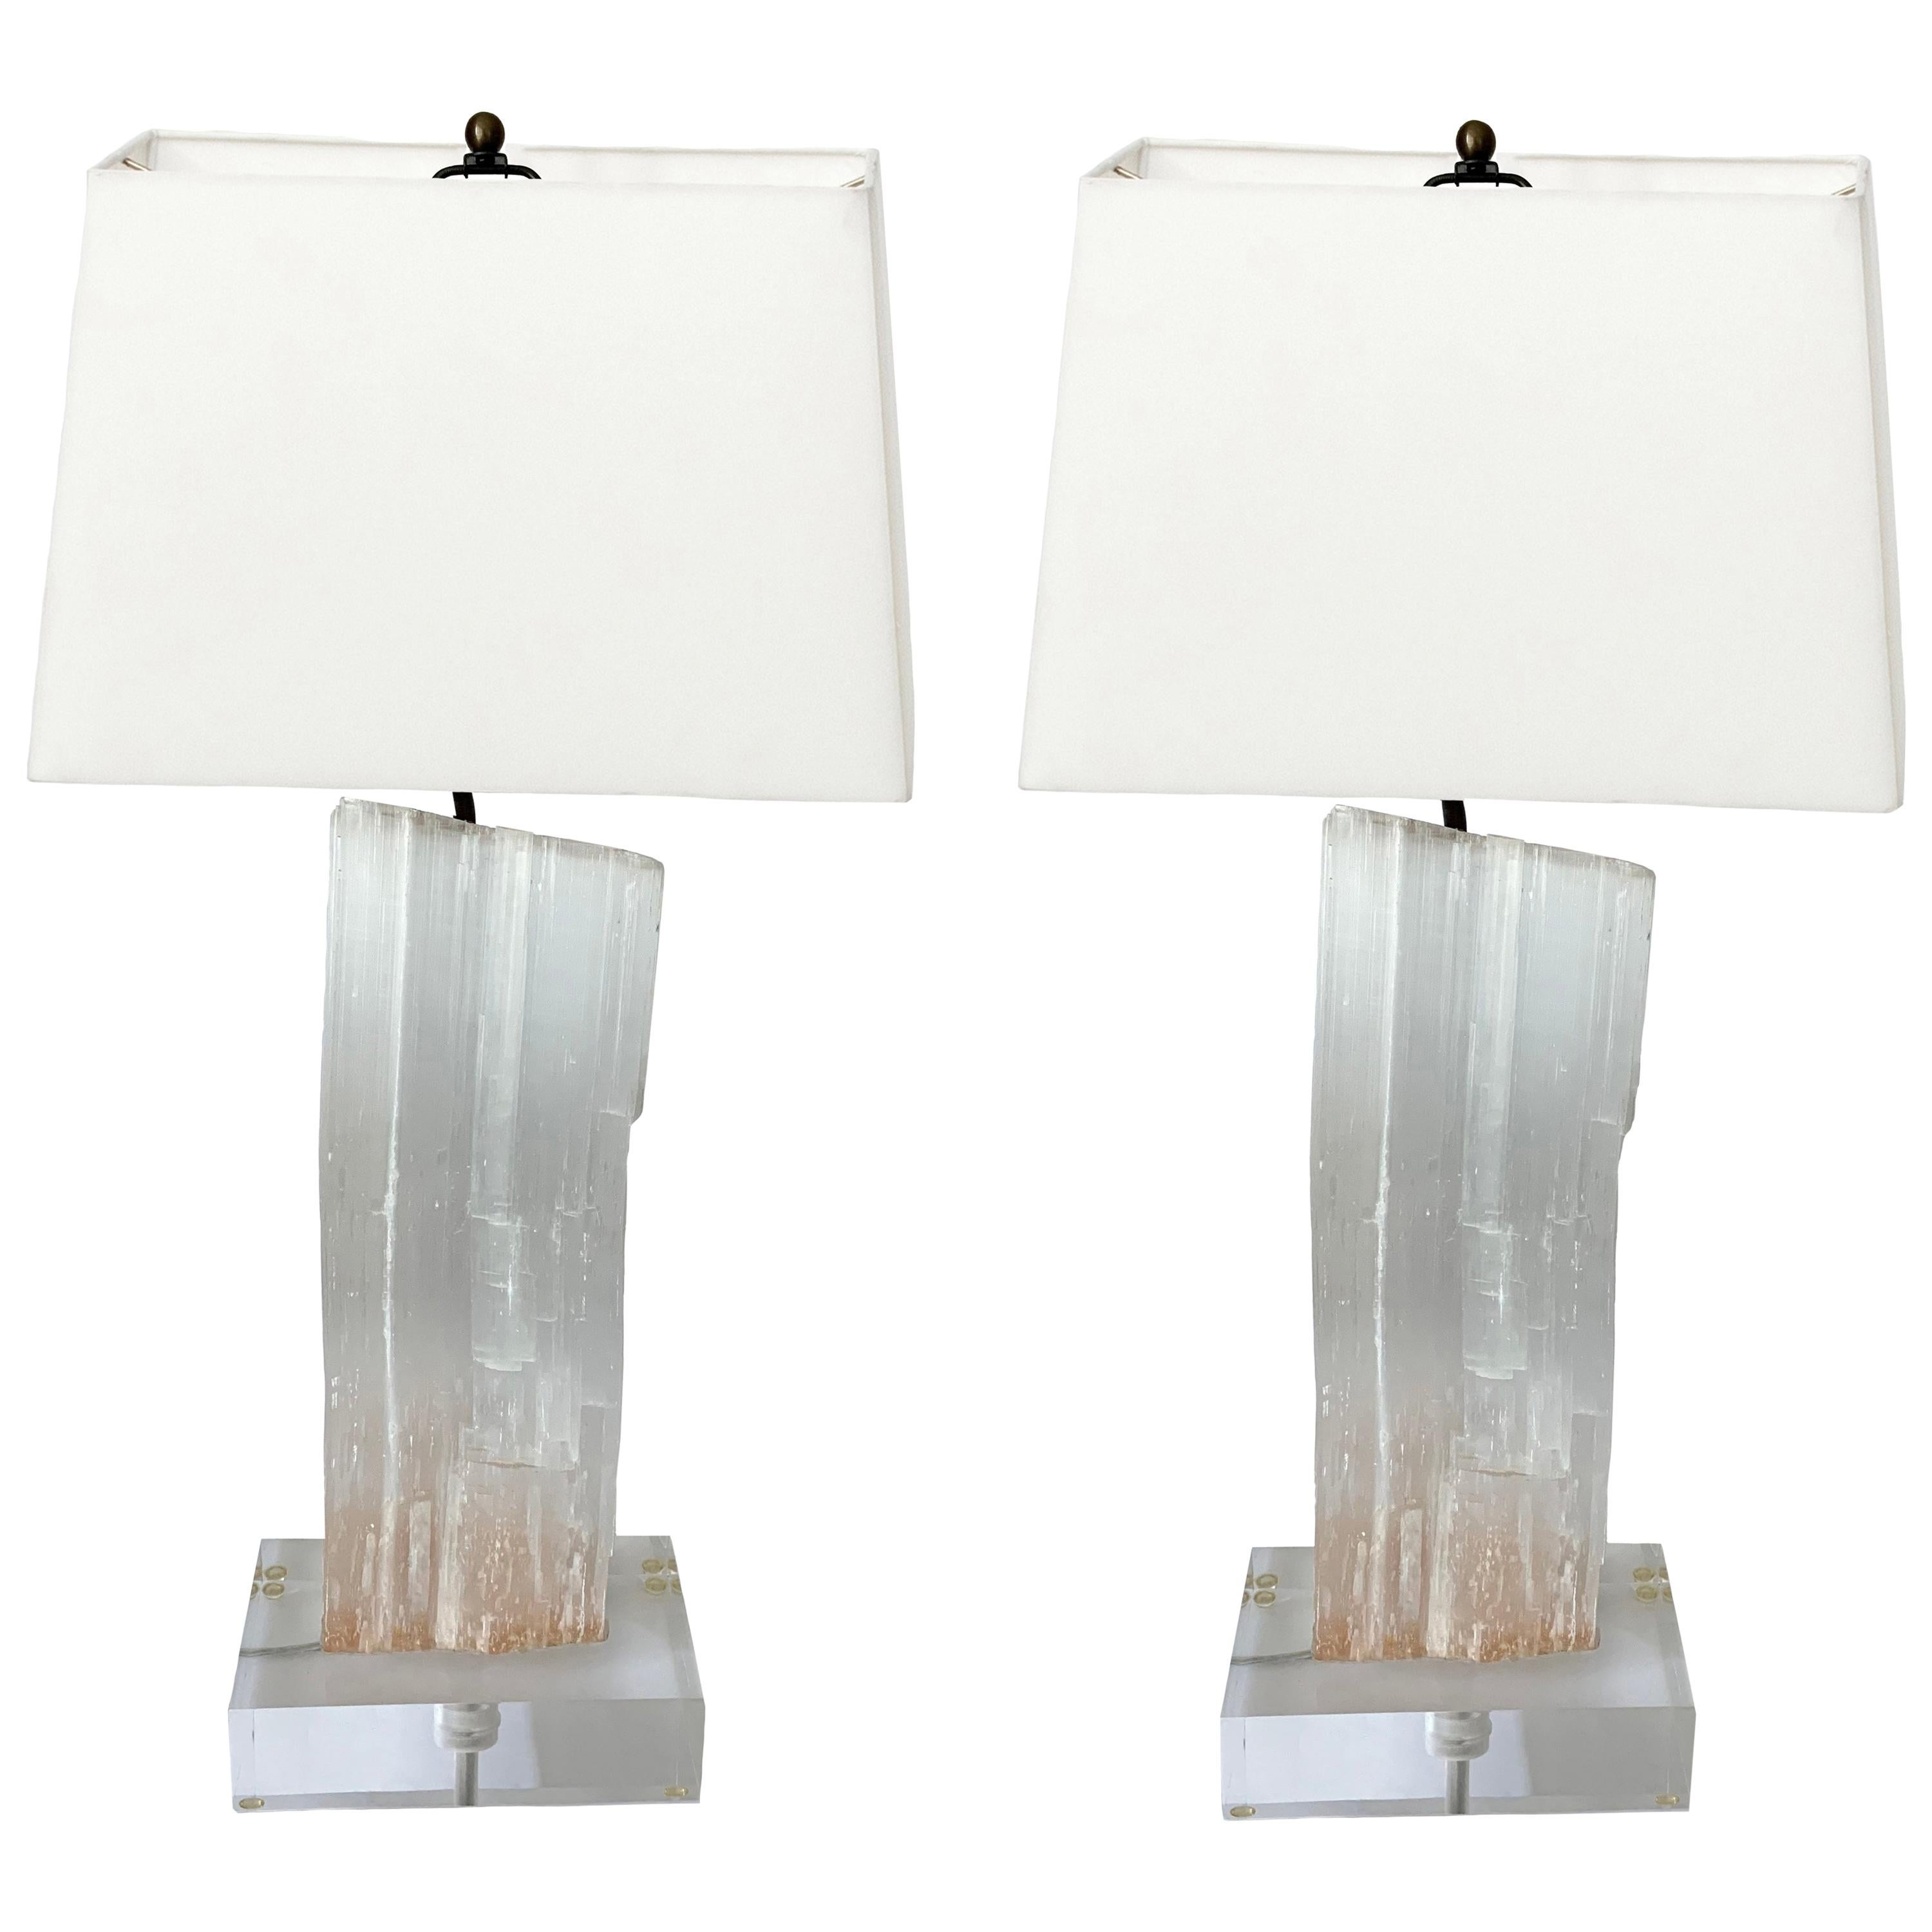 Selenite And Lucite Table Lamps At 1stdibs, Selenite Table Lamp